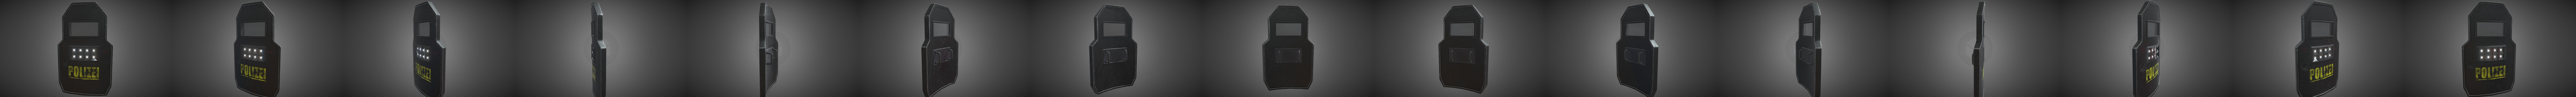 10,534 Riot Shield Images, Stock Photos, 3D objects, & Vectors